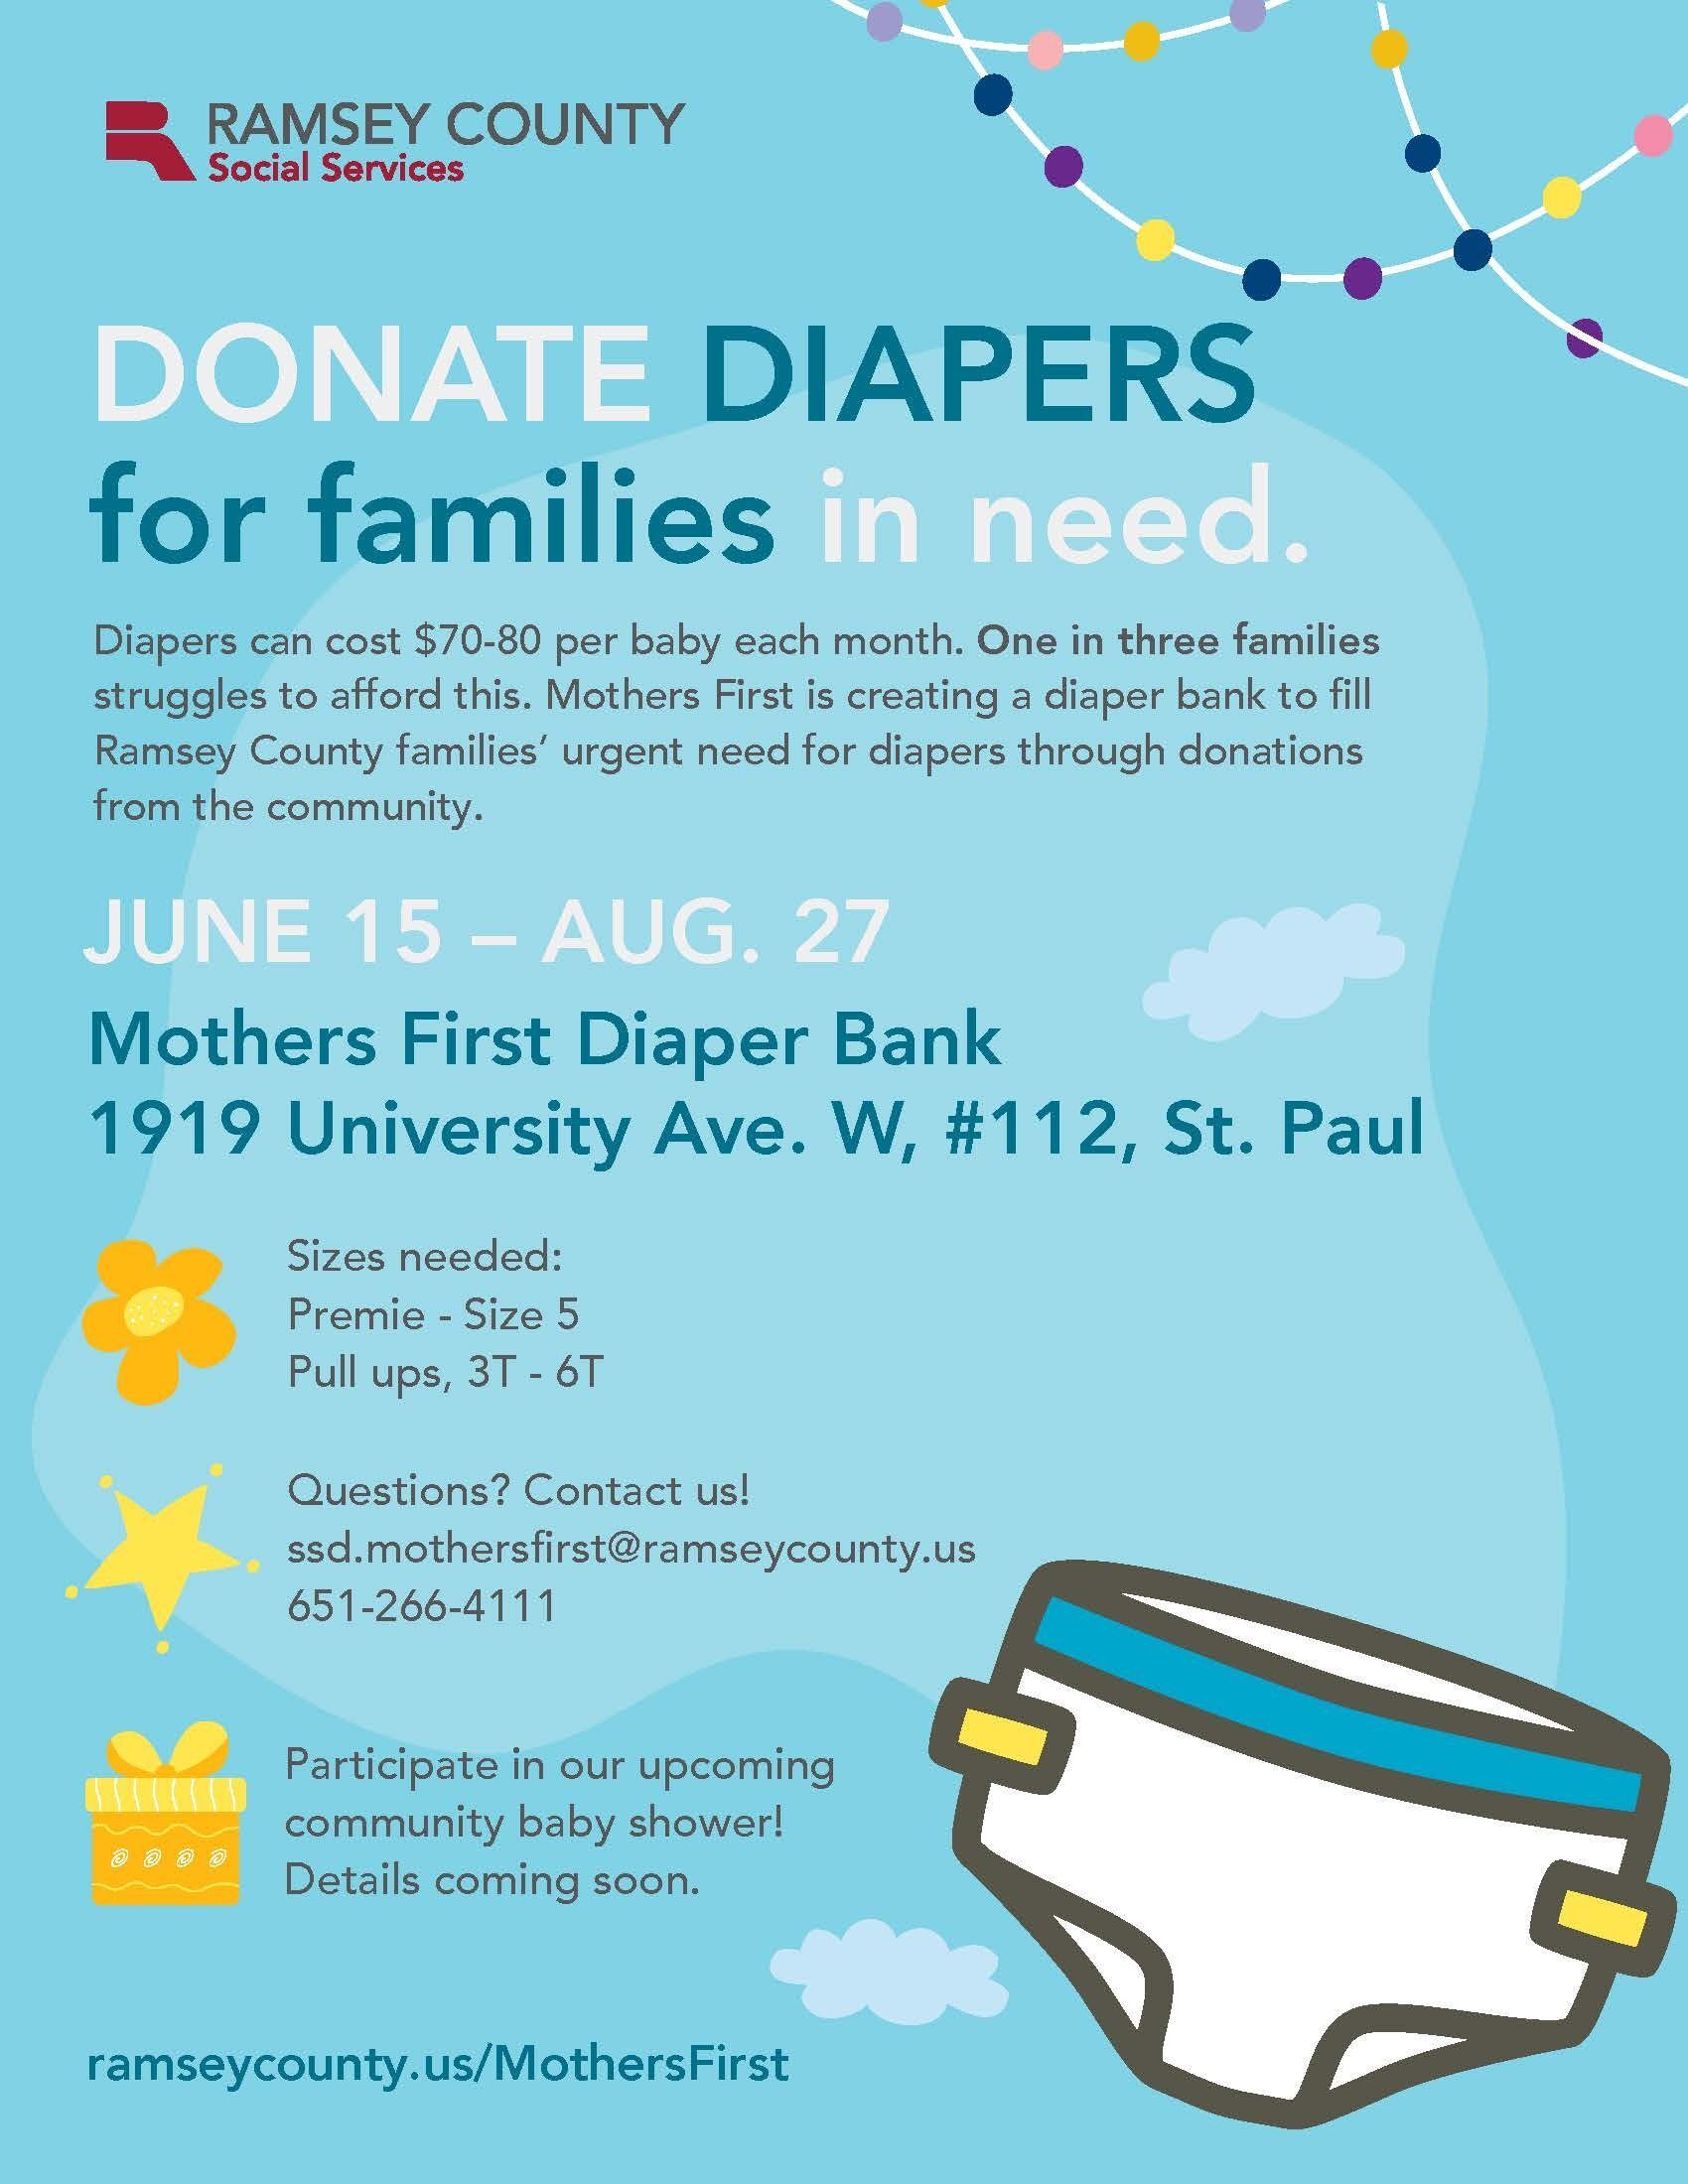 Mothers First Diaper Bank to Continue Collecting Donations through August 27